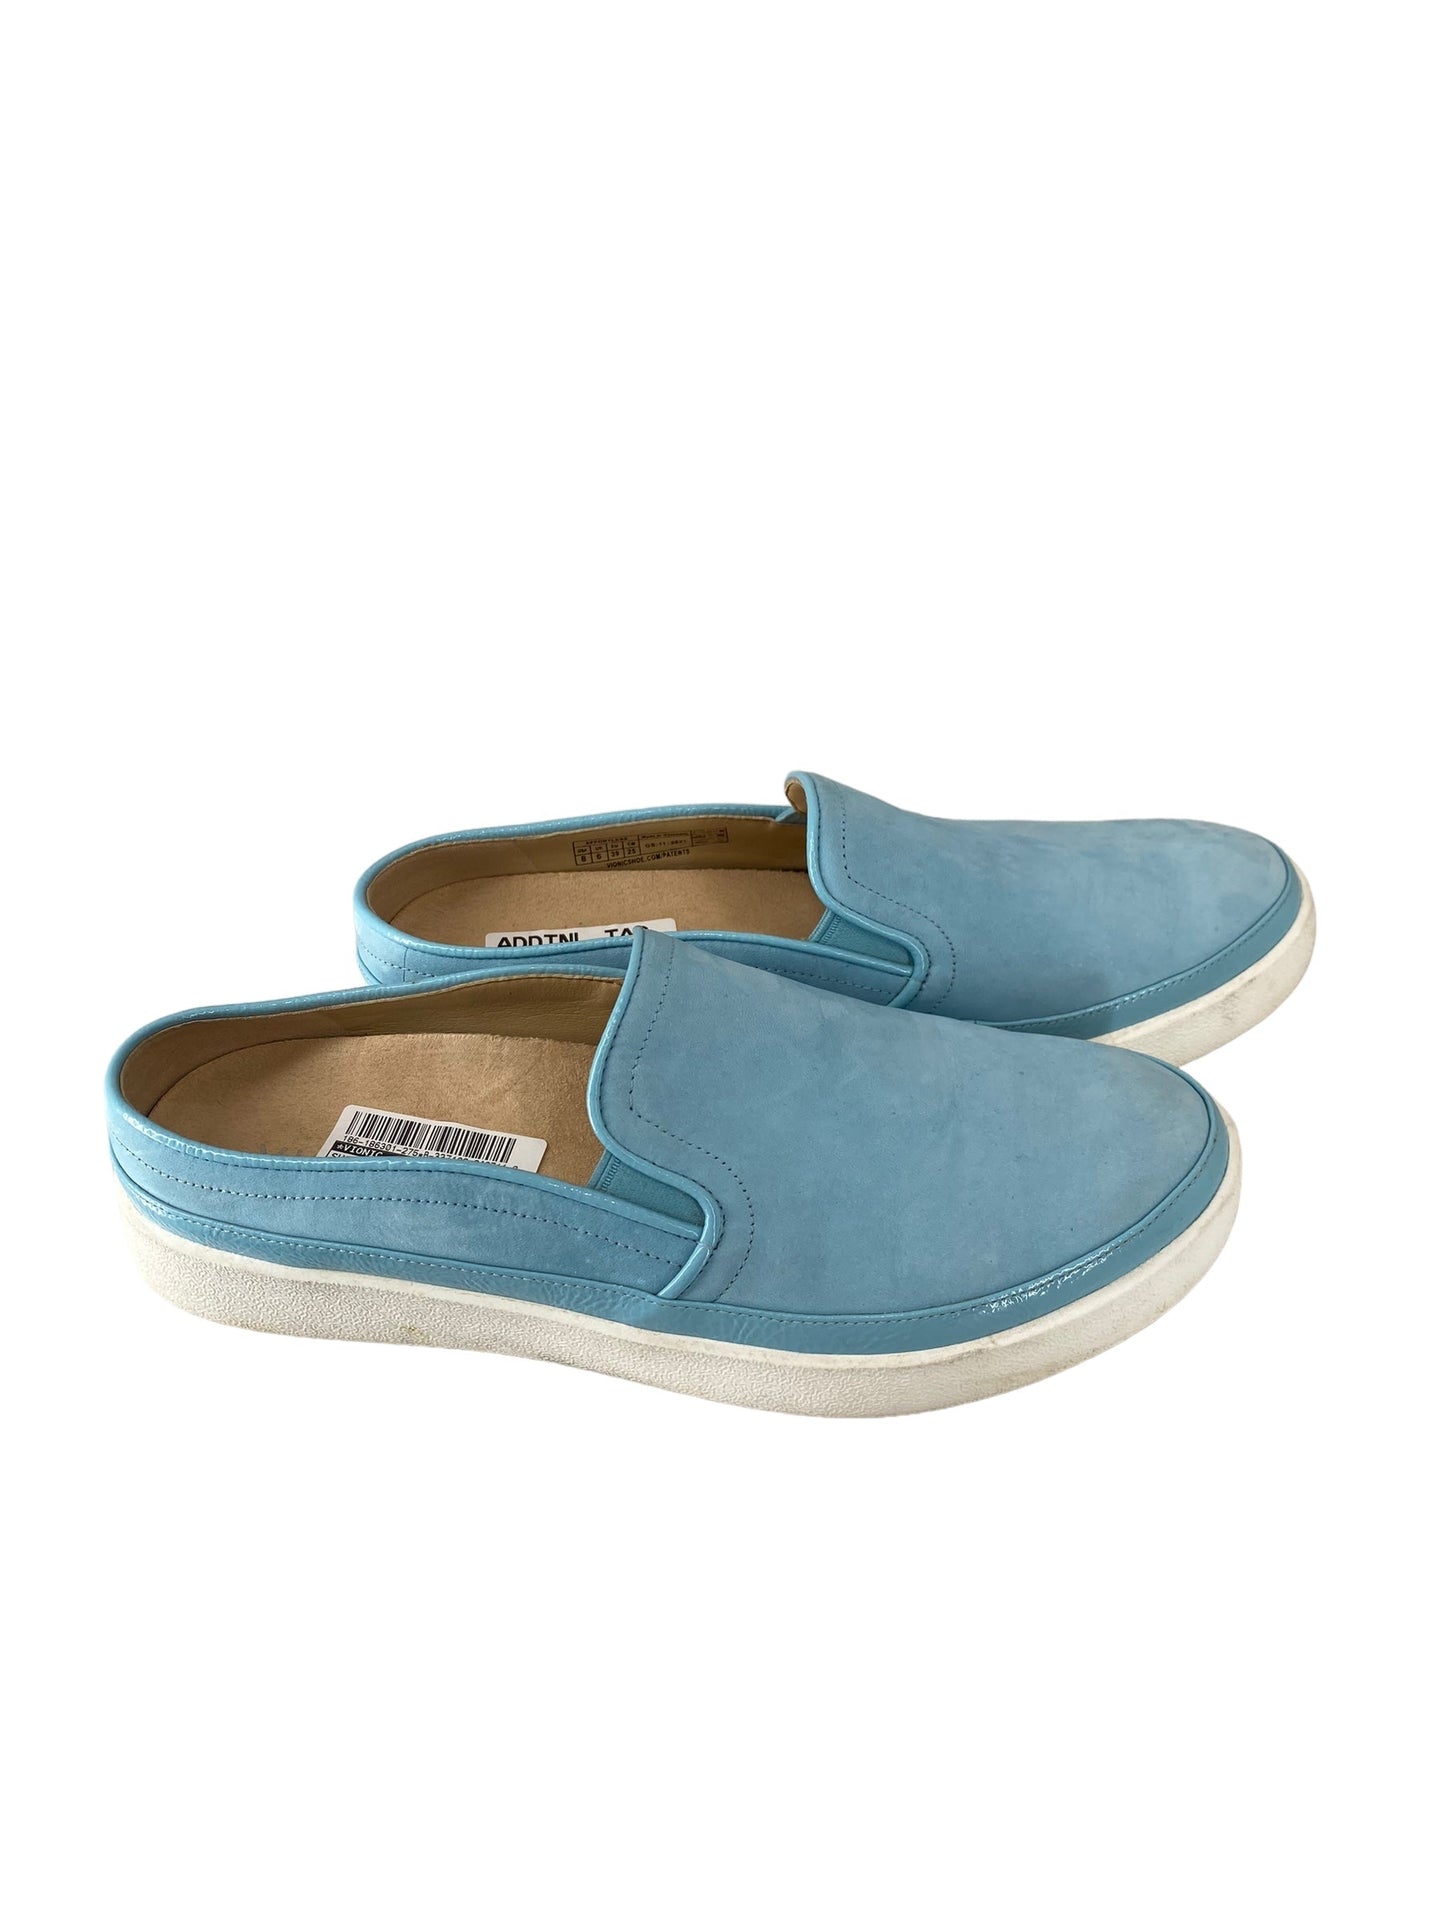 Blue Shoes Sneakers Vionic, Size 8